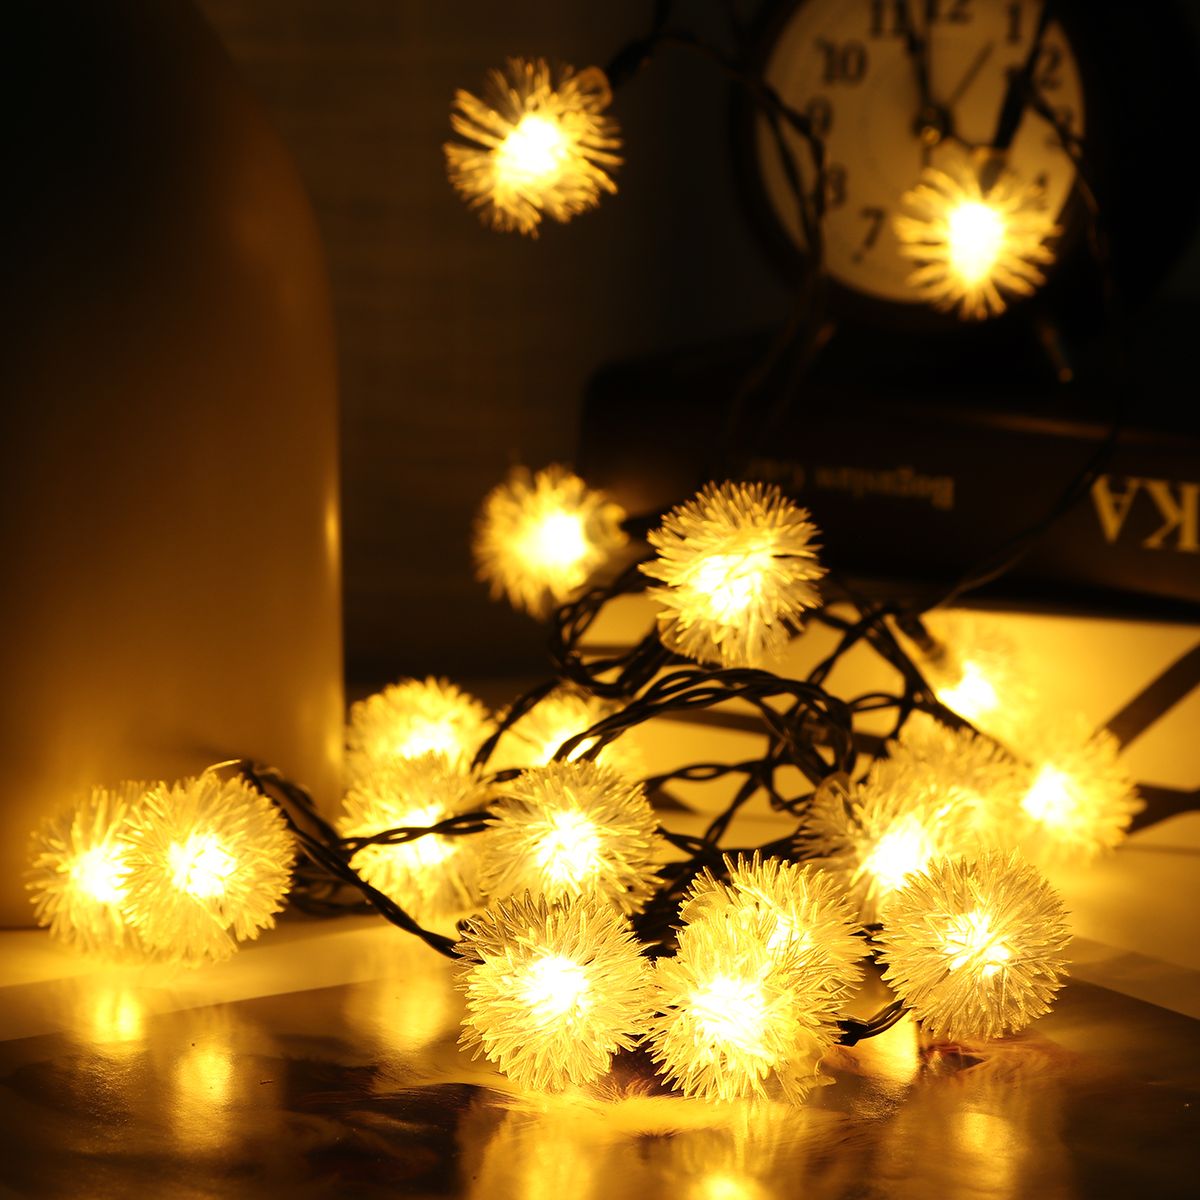 203050100LED-Solar-String-Light-Ball-Waterproof-Fairy-Lamp-Garden-Outdoor-Party-Christmas-Decoration-1730355